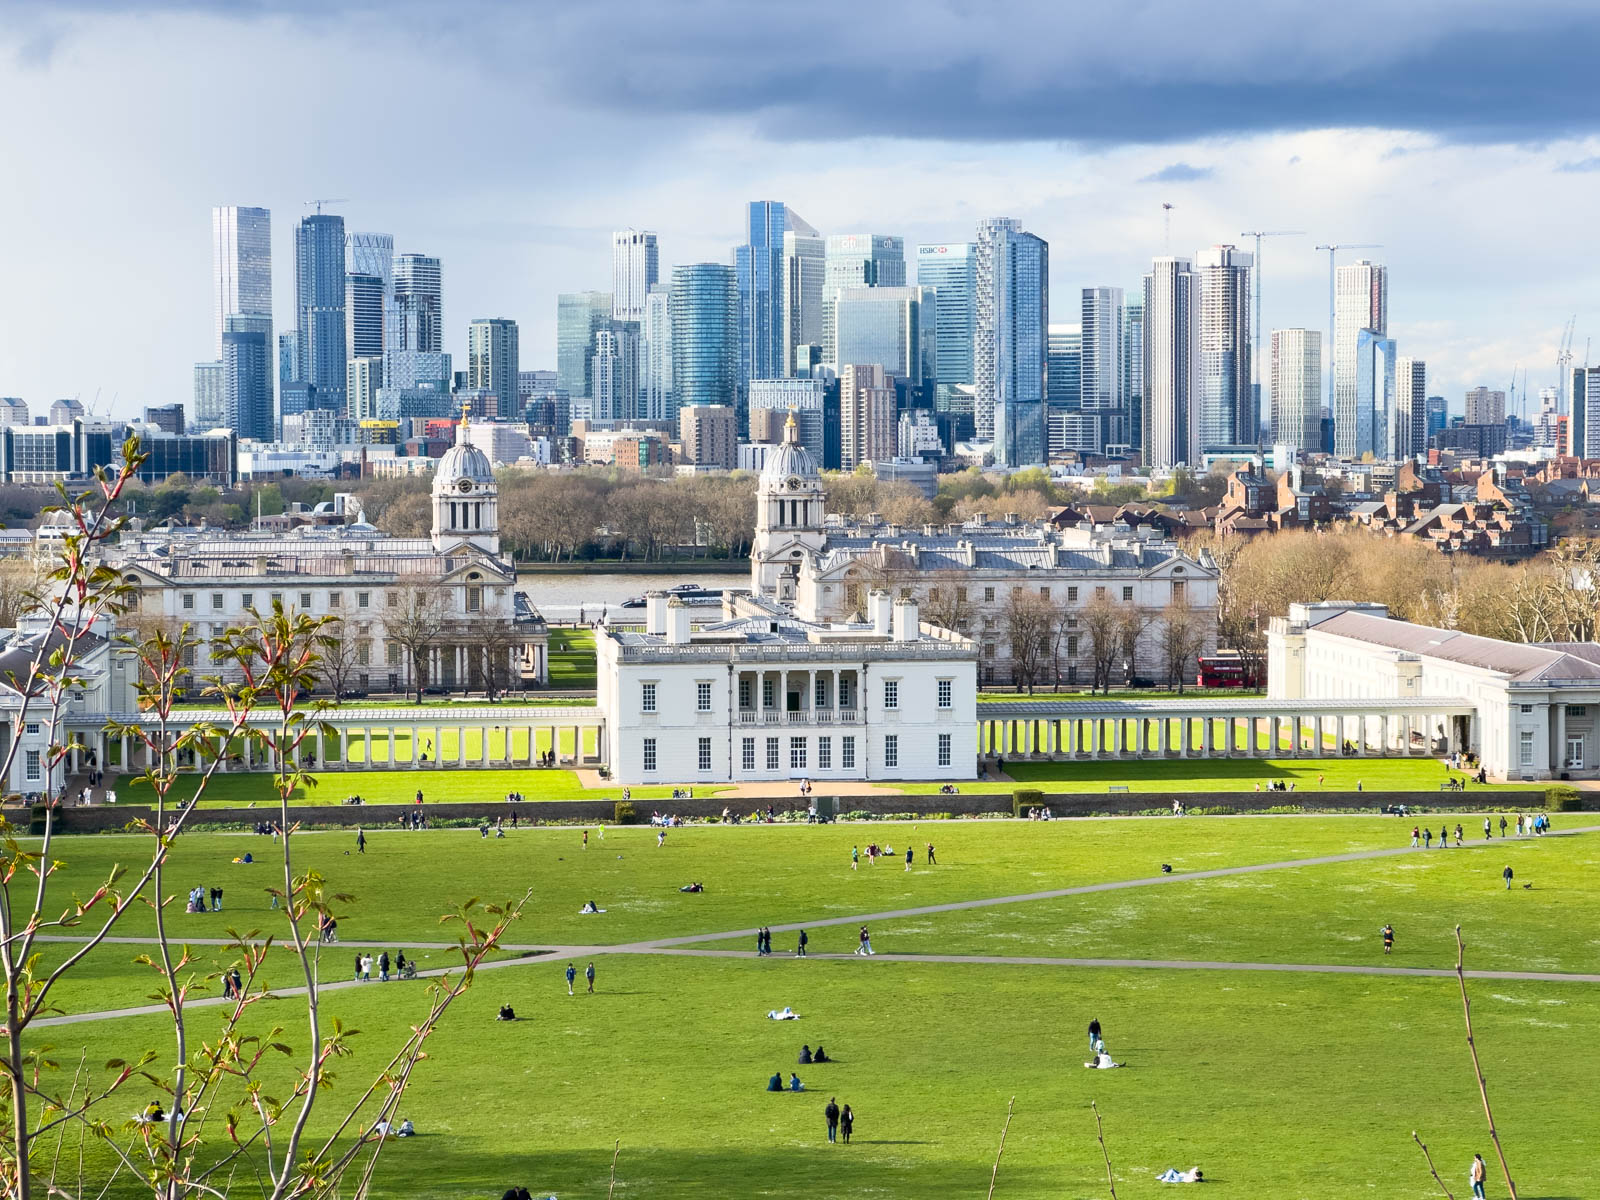 The London city skyline as seen from Greenwich.